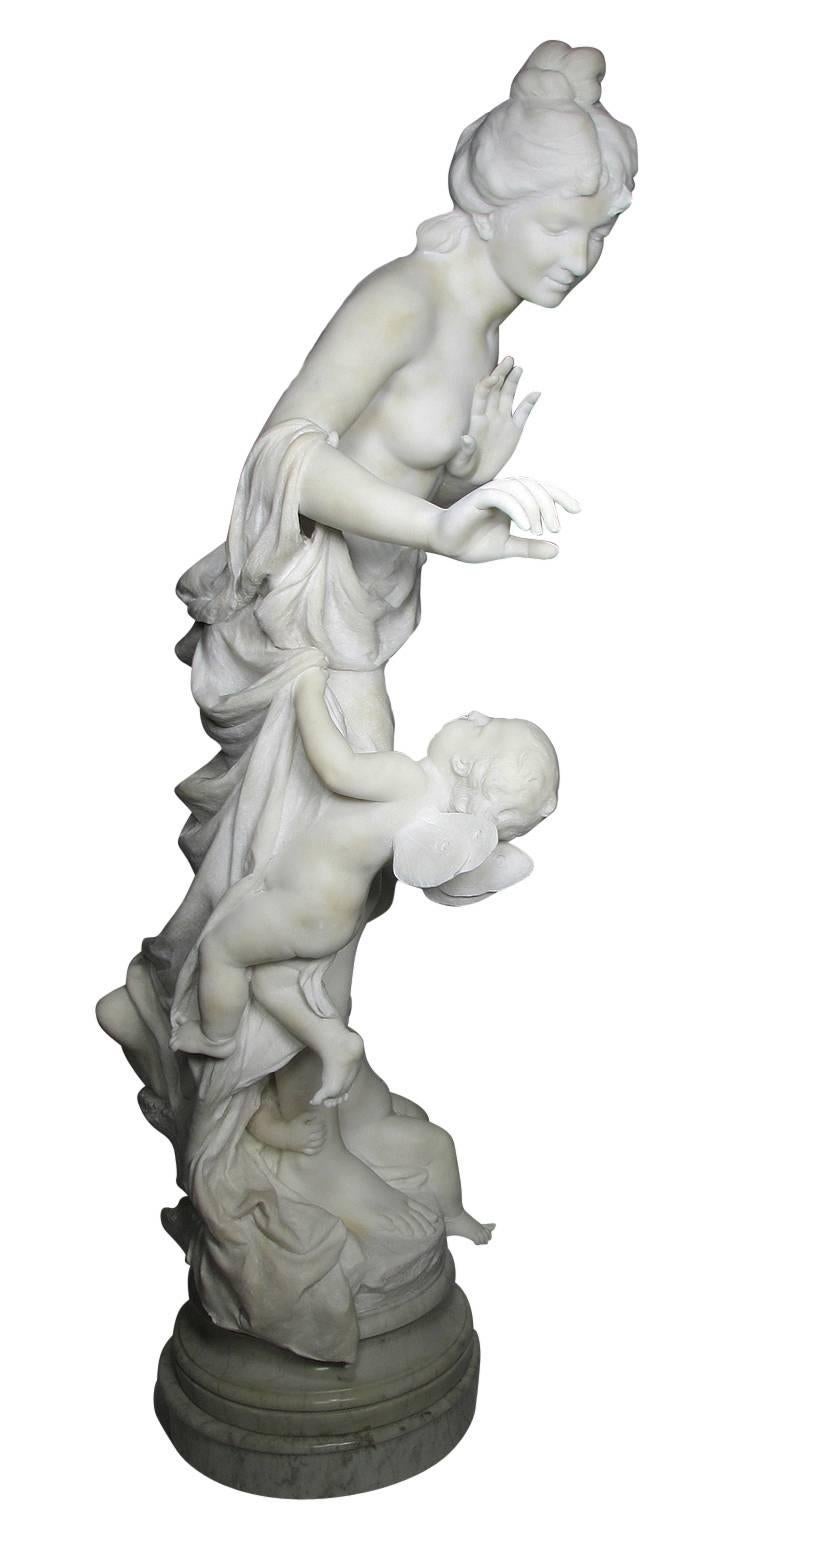 Carved Italian 19th Century Lifesize Marble Sculpture Titled 